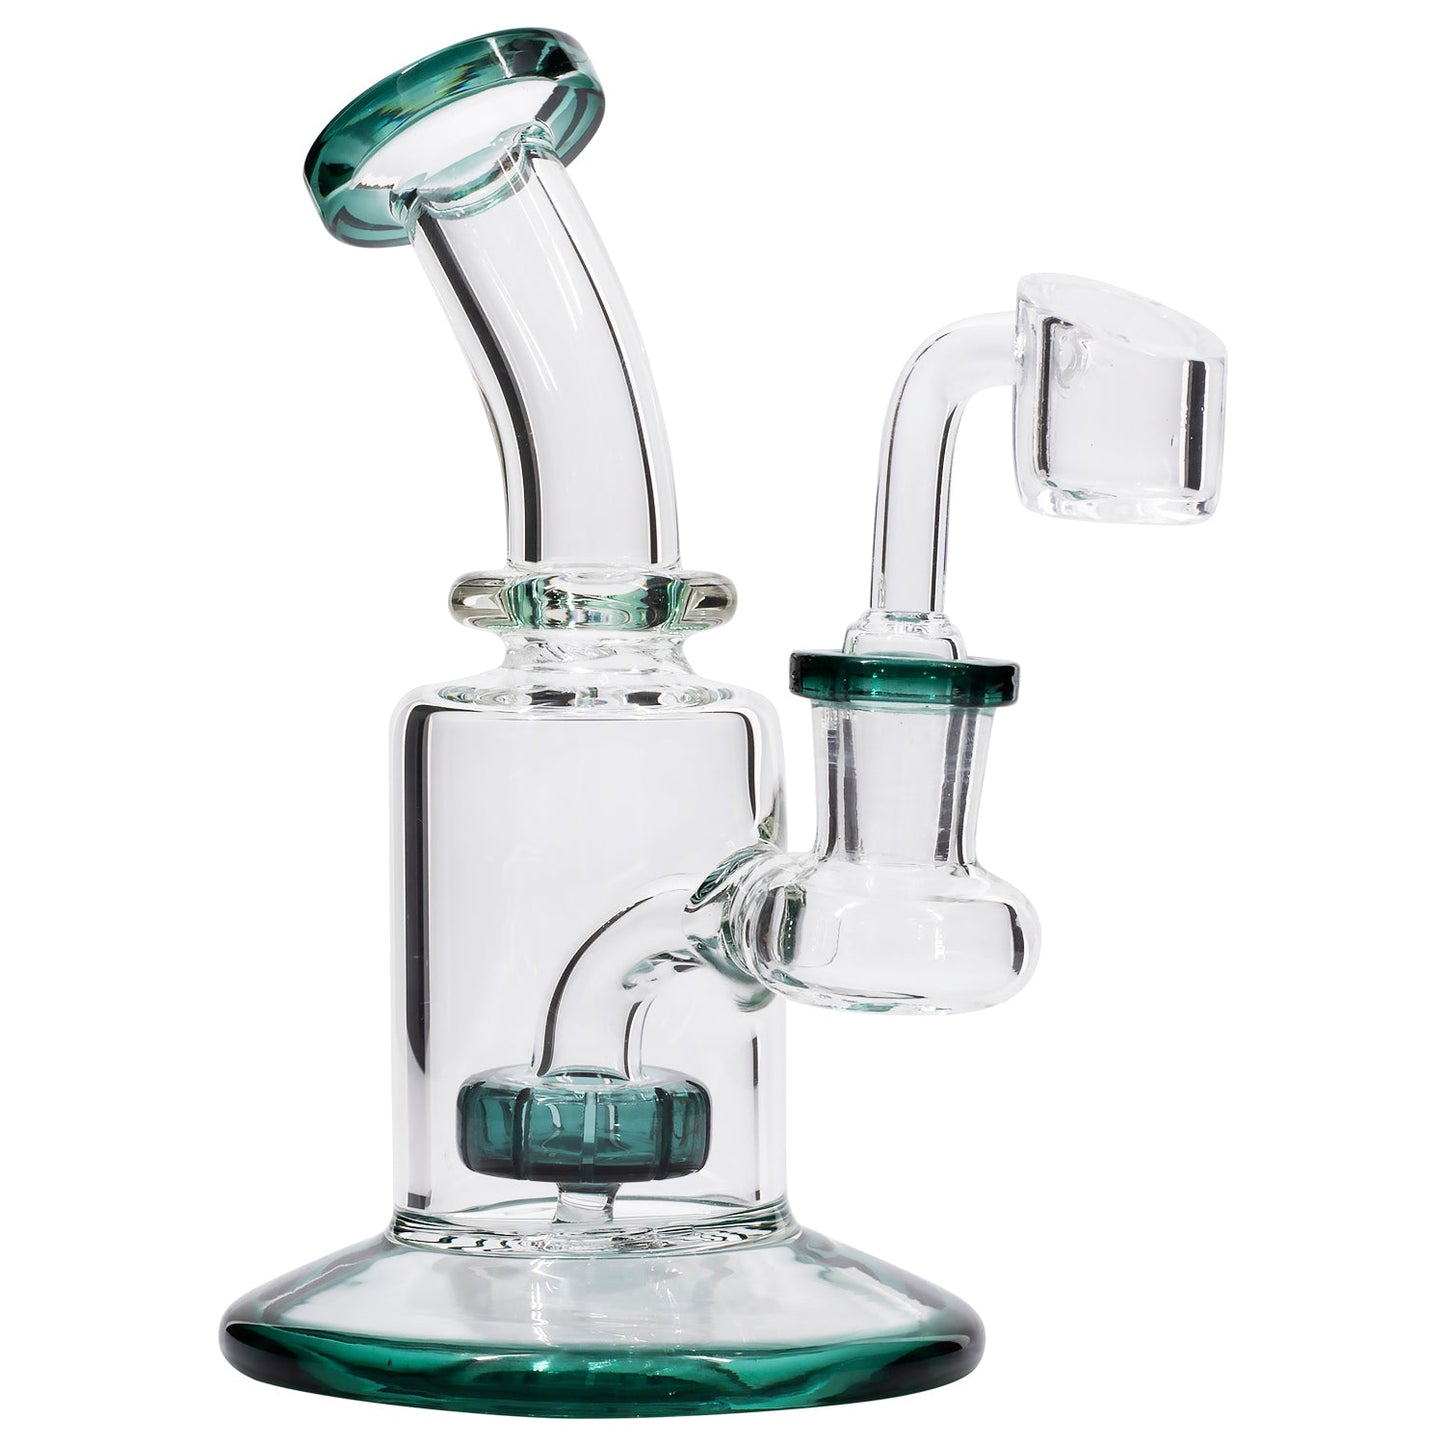 CaliConnected Showerhead Perc Mini Rig Teal